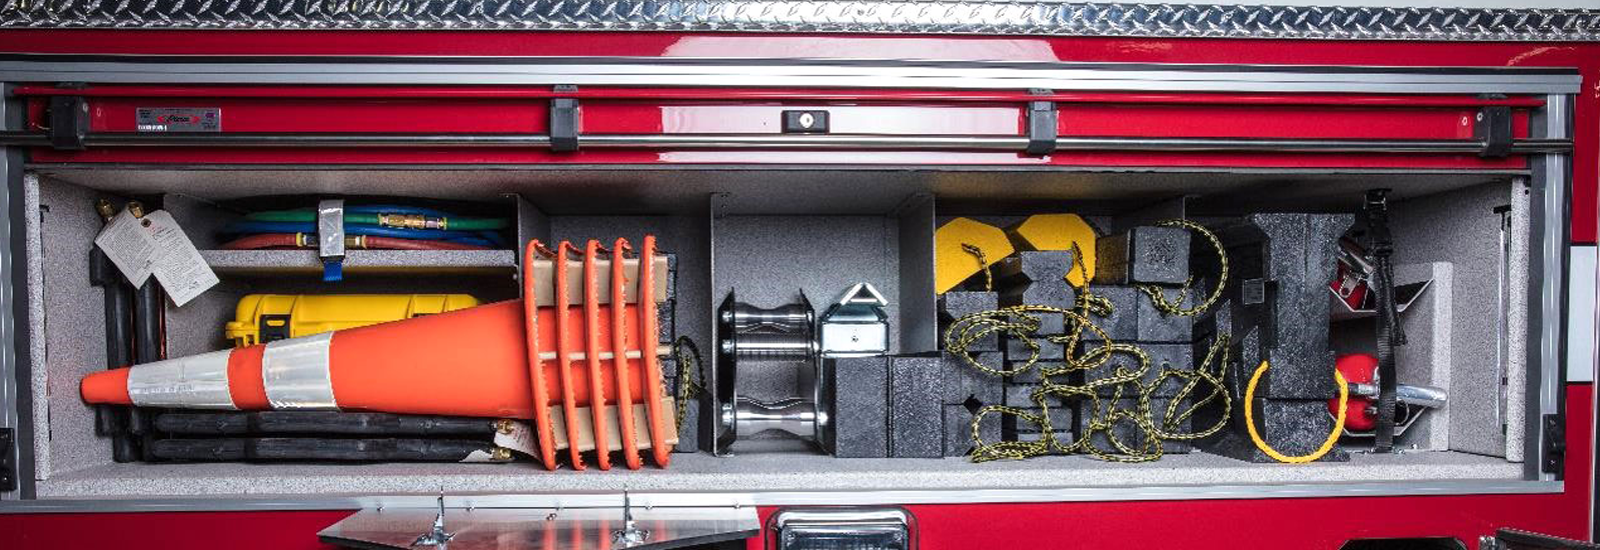 An open compartment of an aerial fire truck shows traffic cones and fire truck wheel chocks which are essential items to secure the area around the apparatus on-scene. 